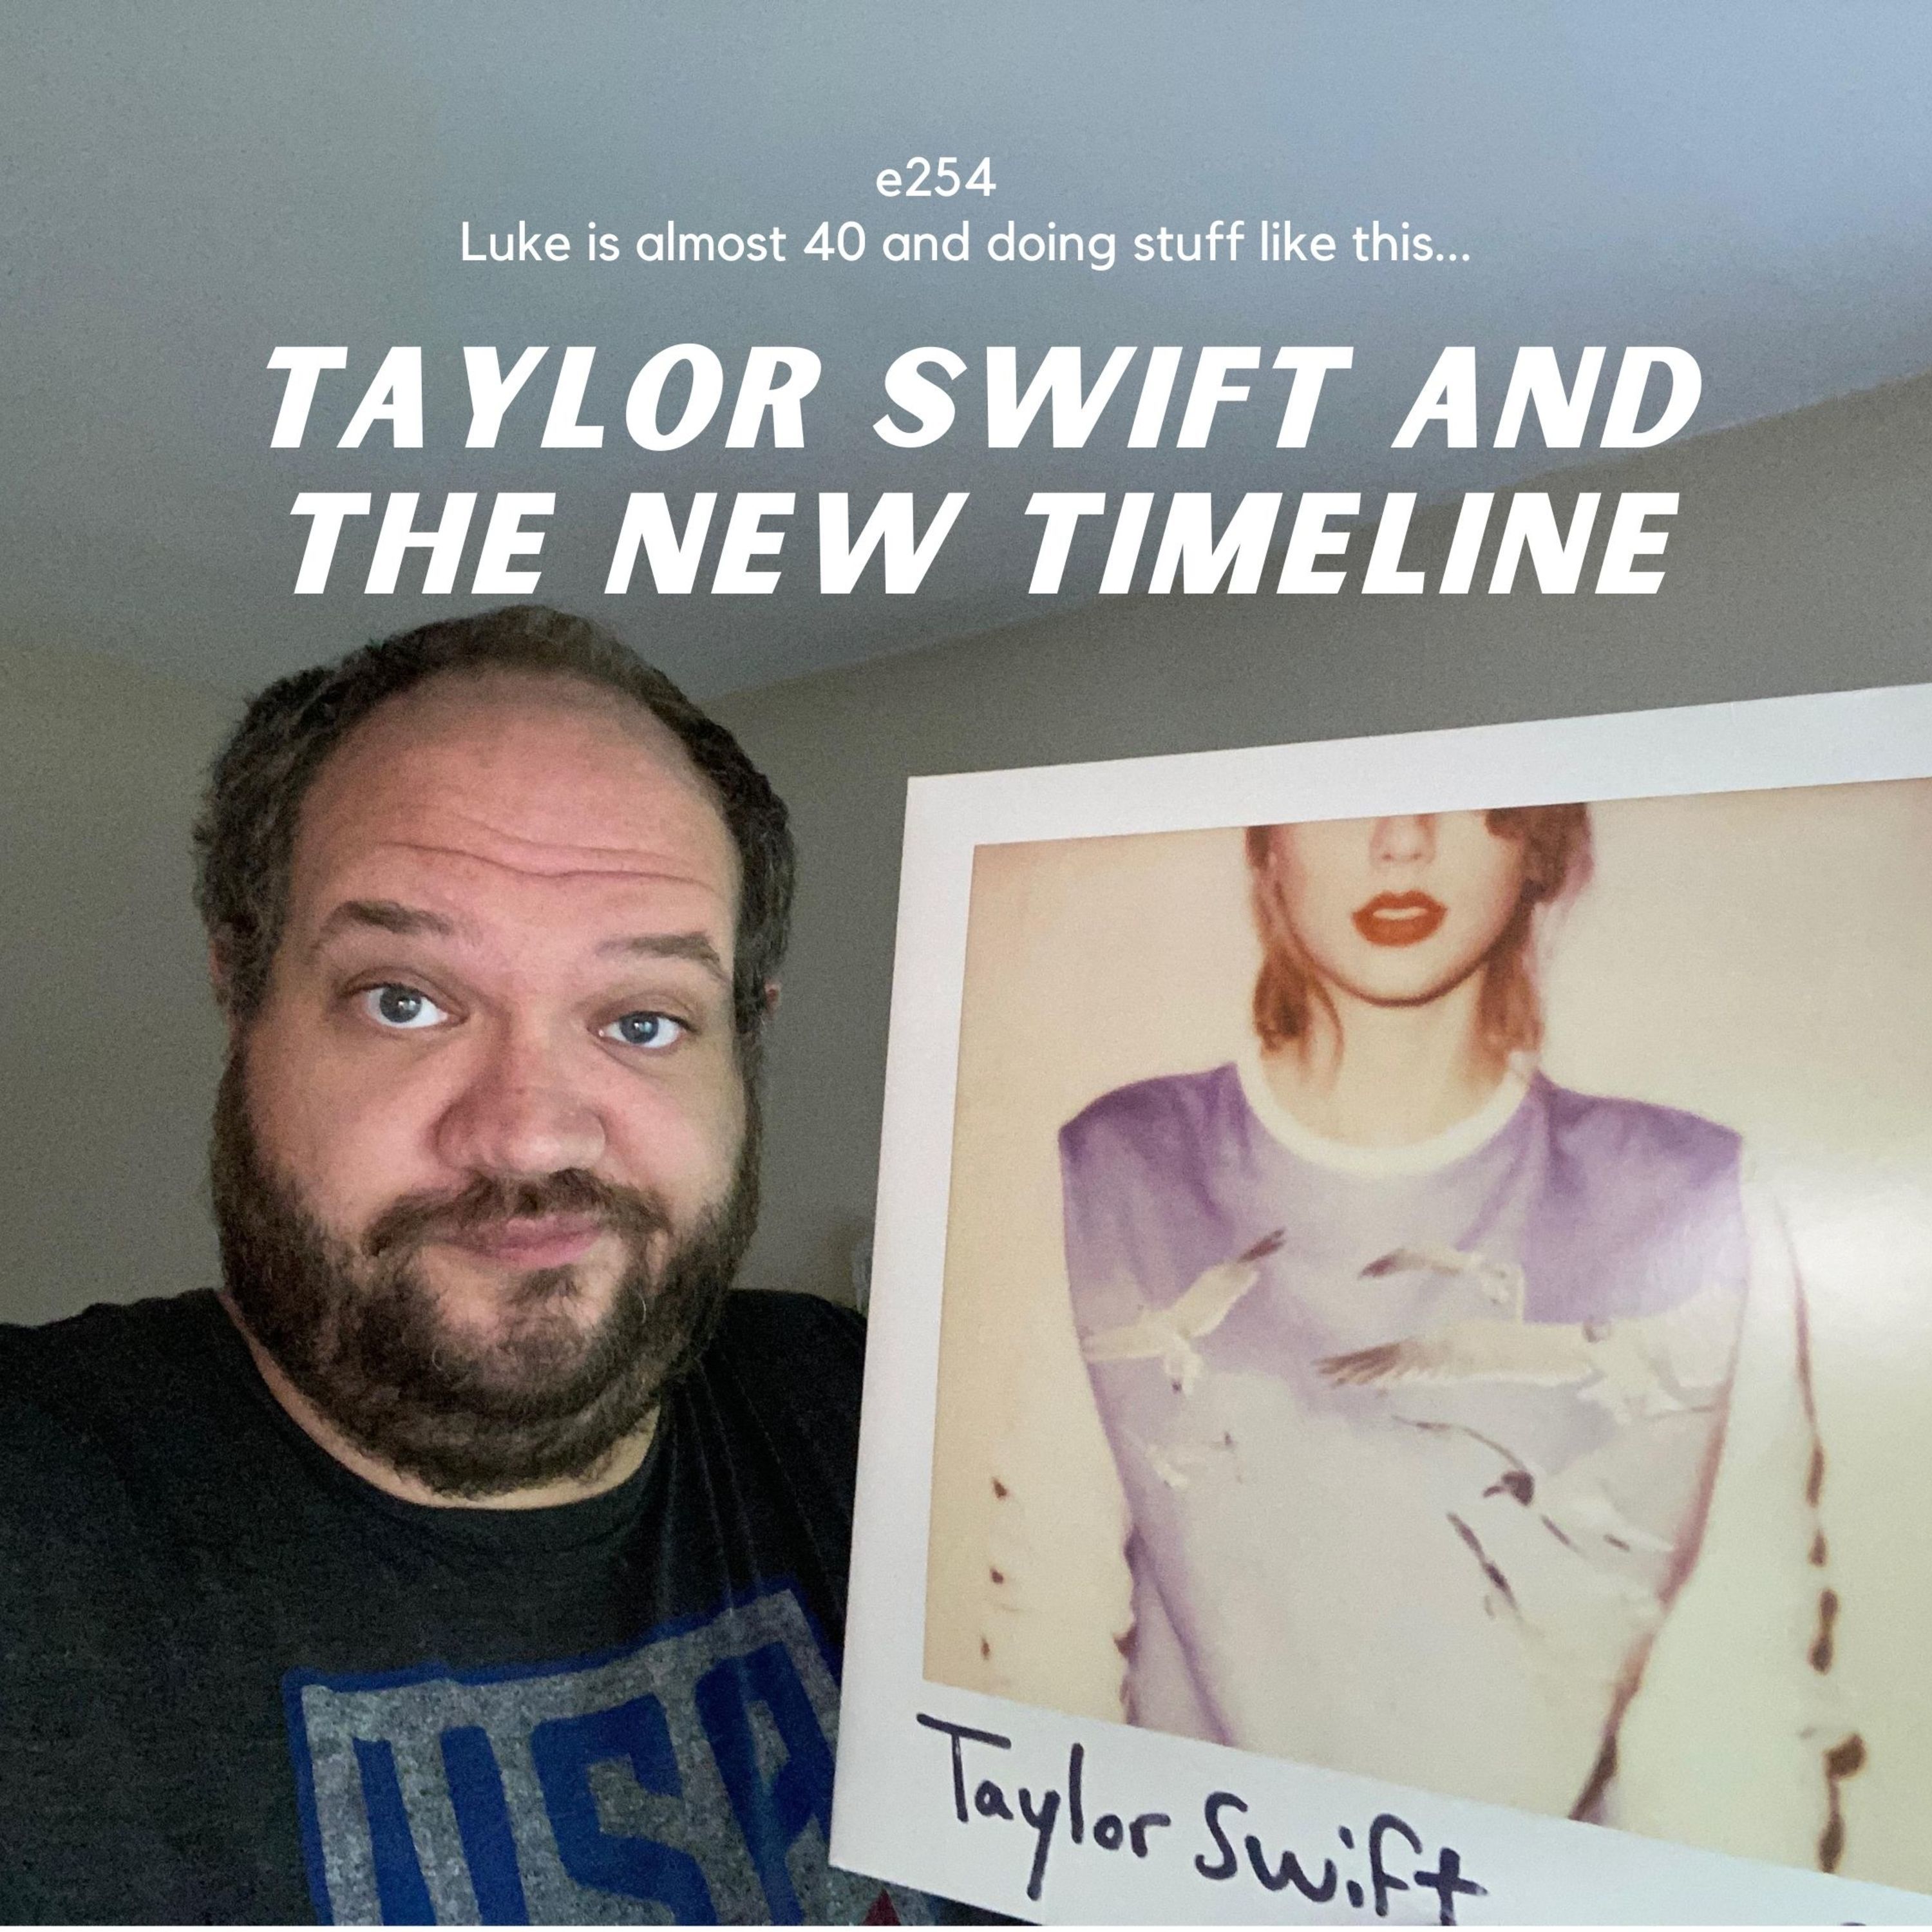 Taylor Swift and the New Timeline